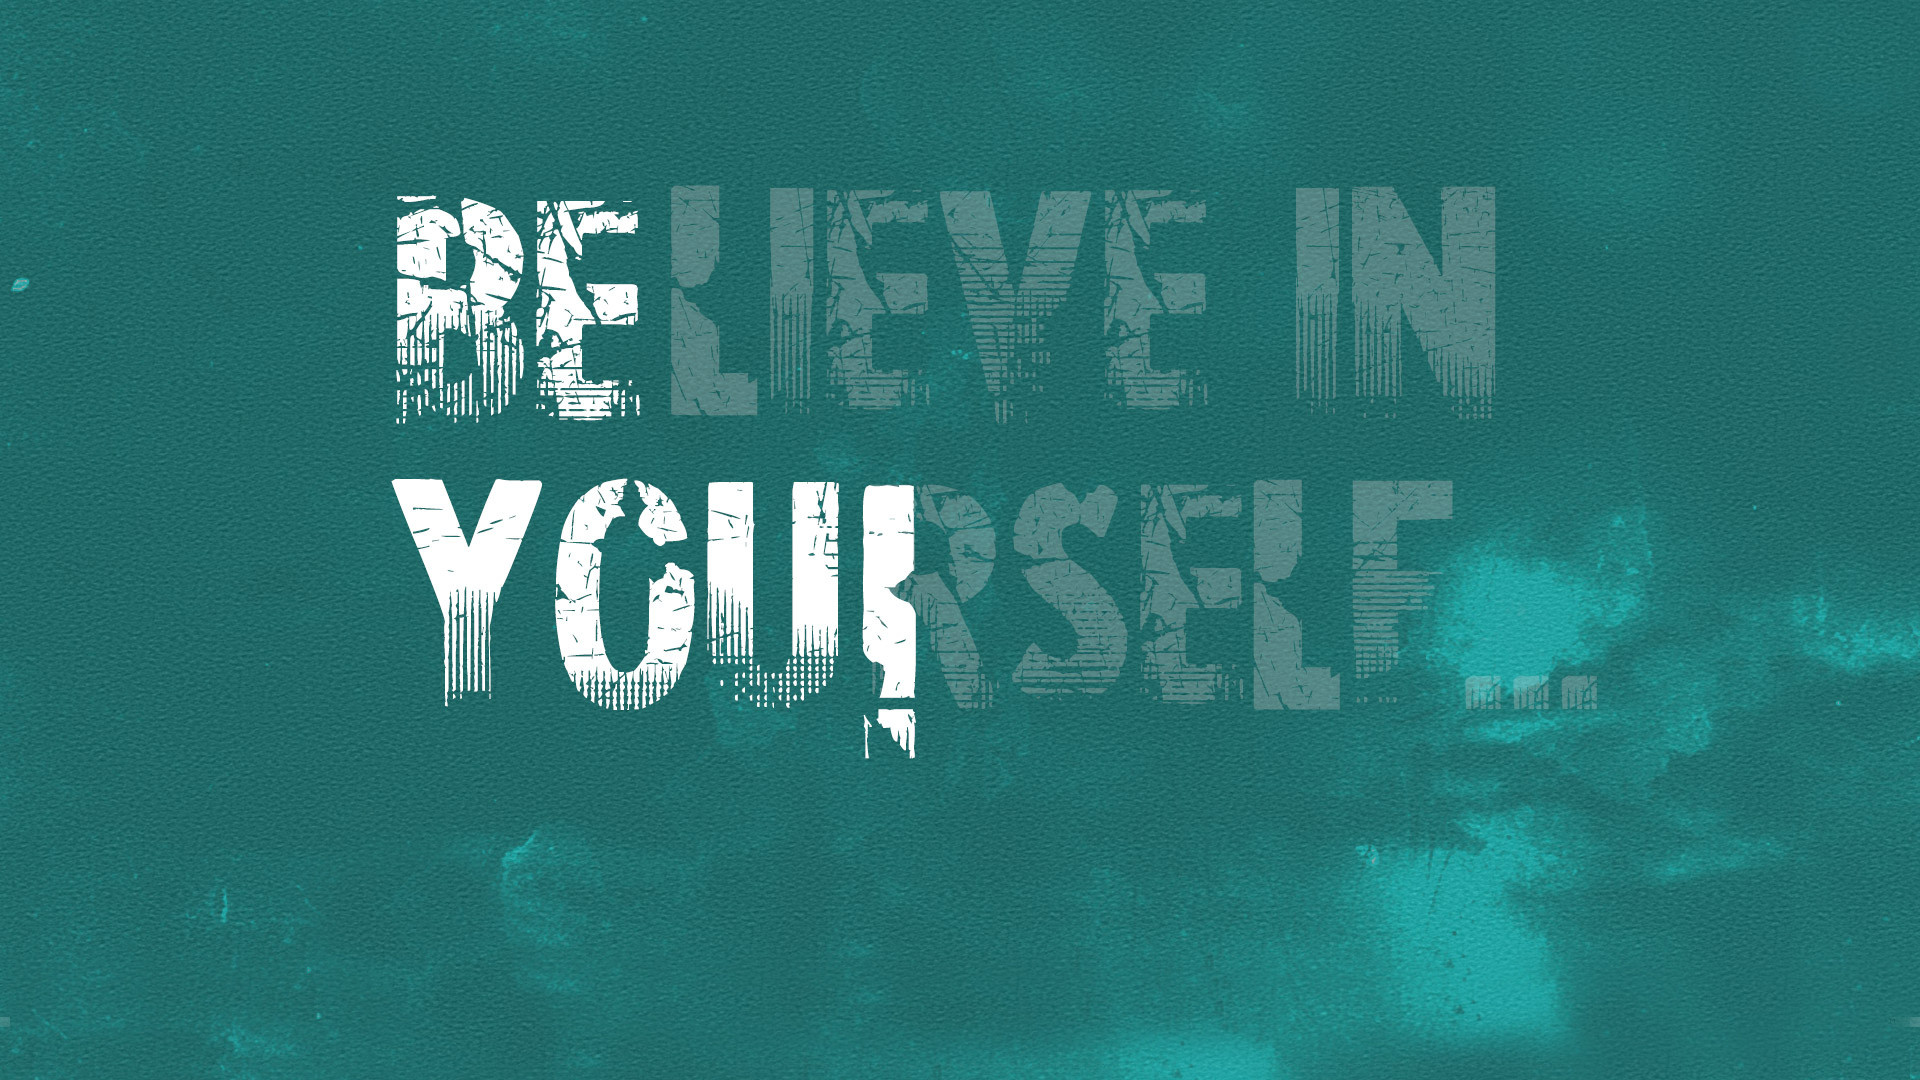 inspirational wallpapers,text,font,green,turquoise,graphic design